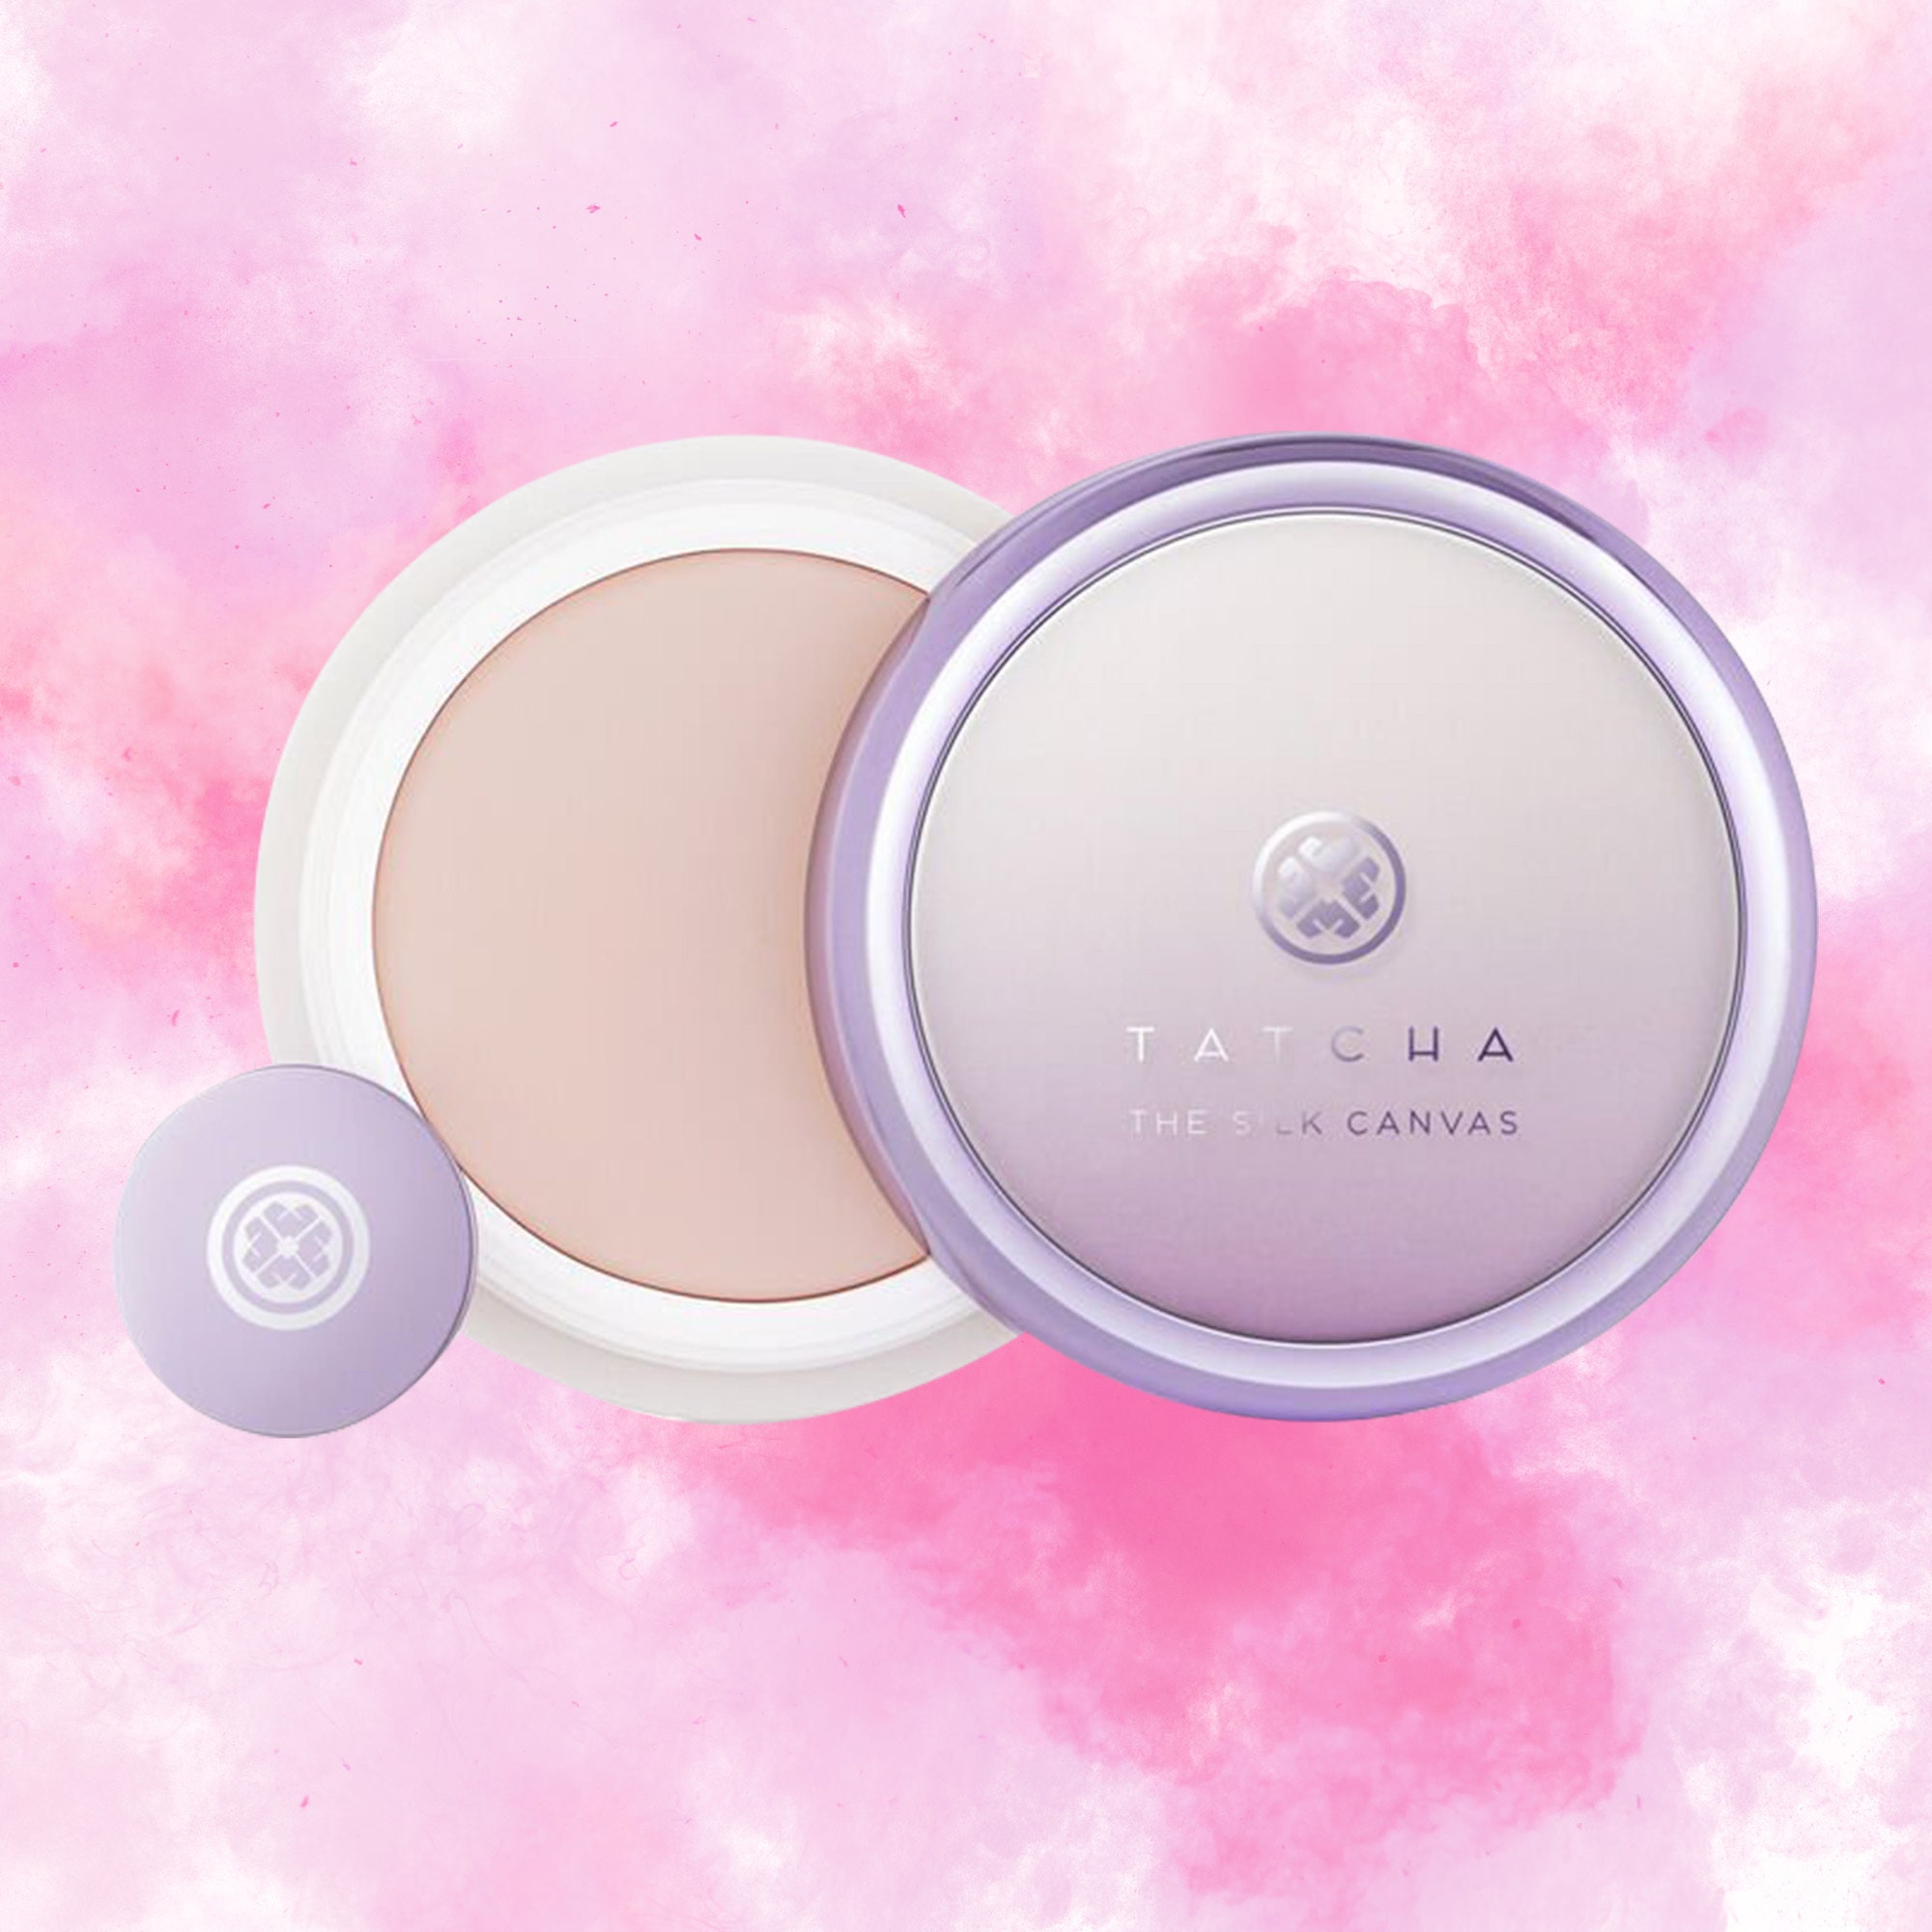 Tatcha's Labor Day Weekend Sale 2020 Is Happening — Shop Now